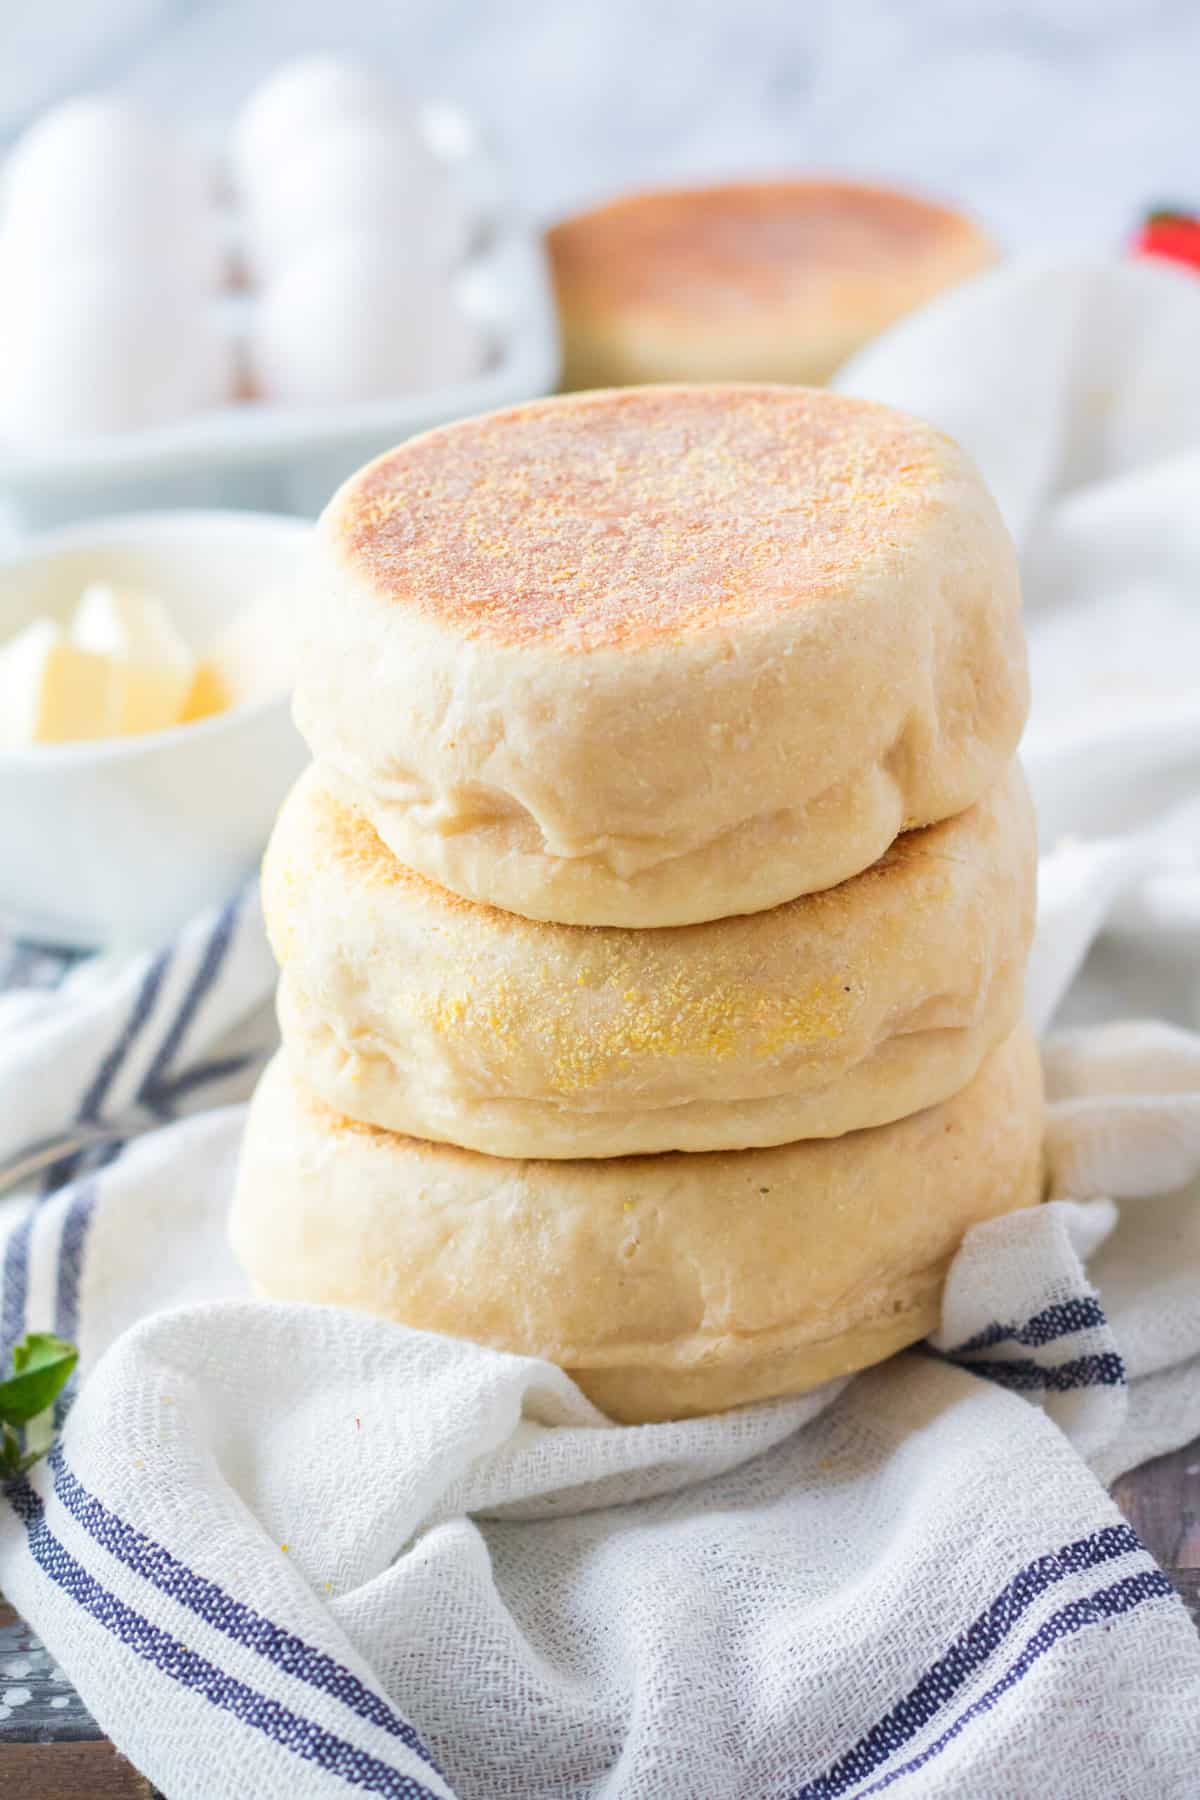 Three english muffins are stacked on top of one another.